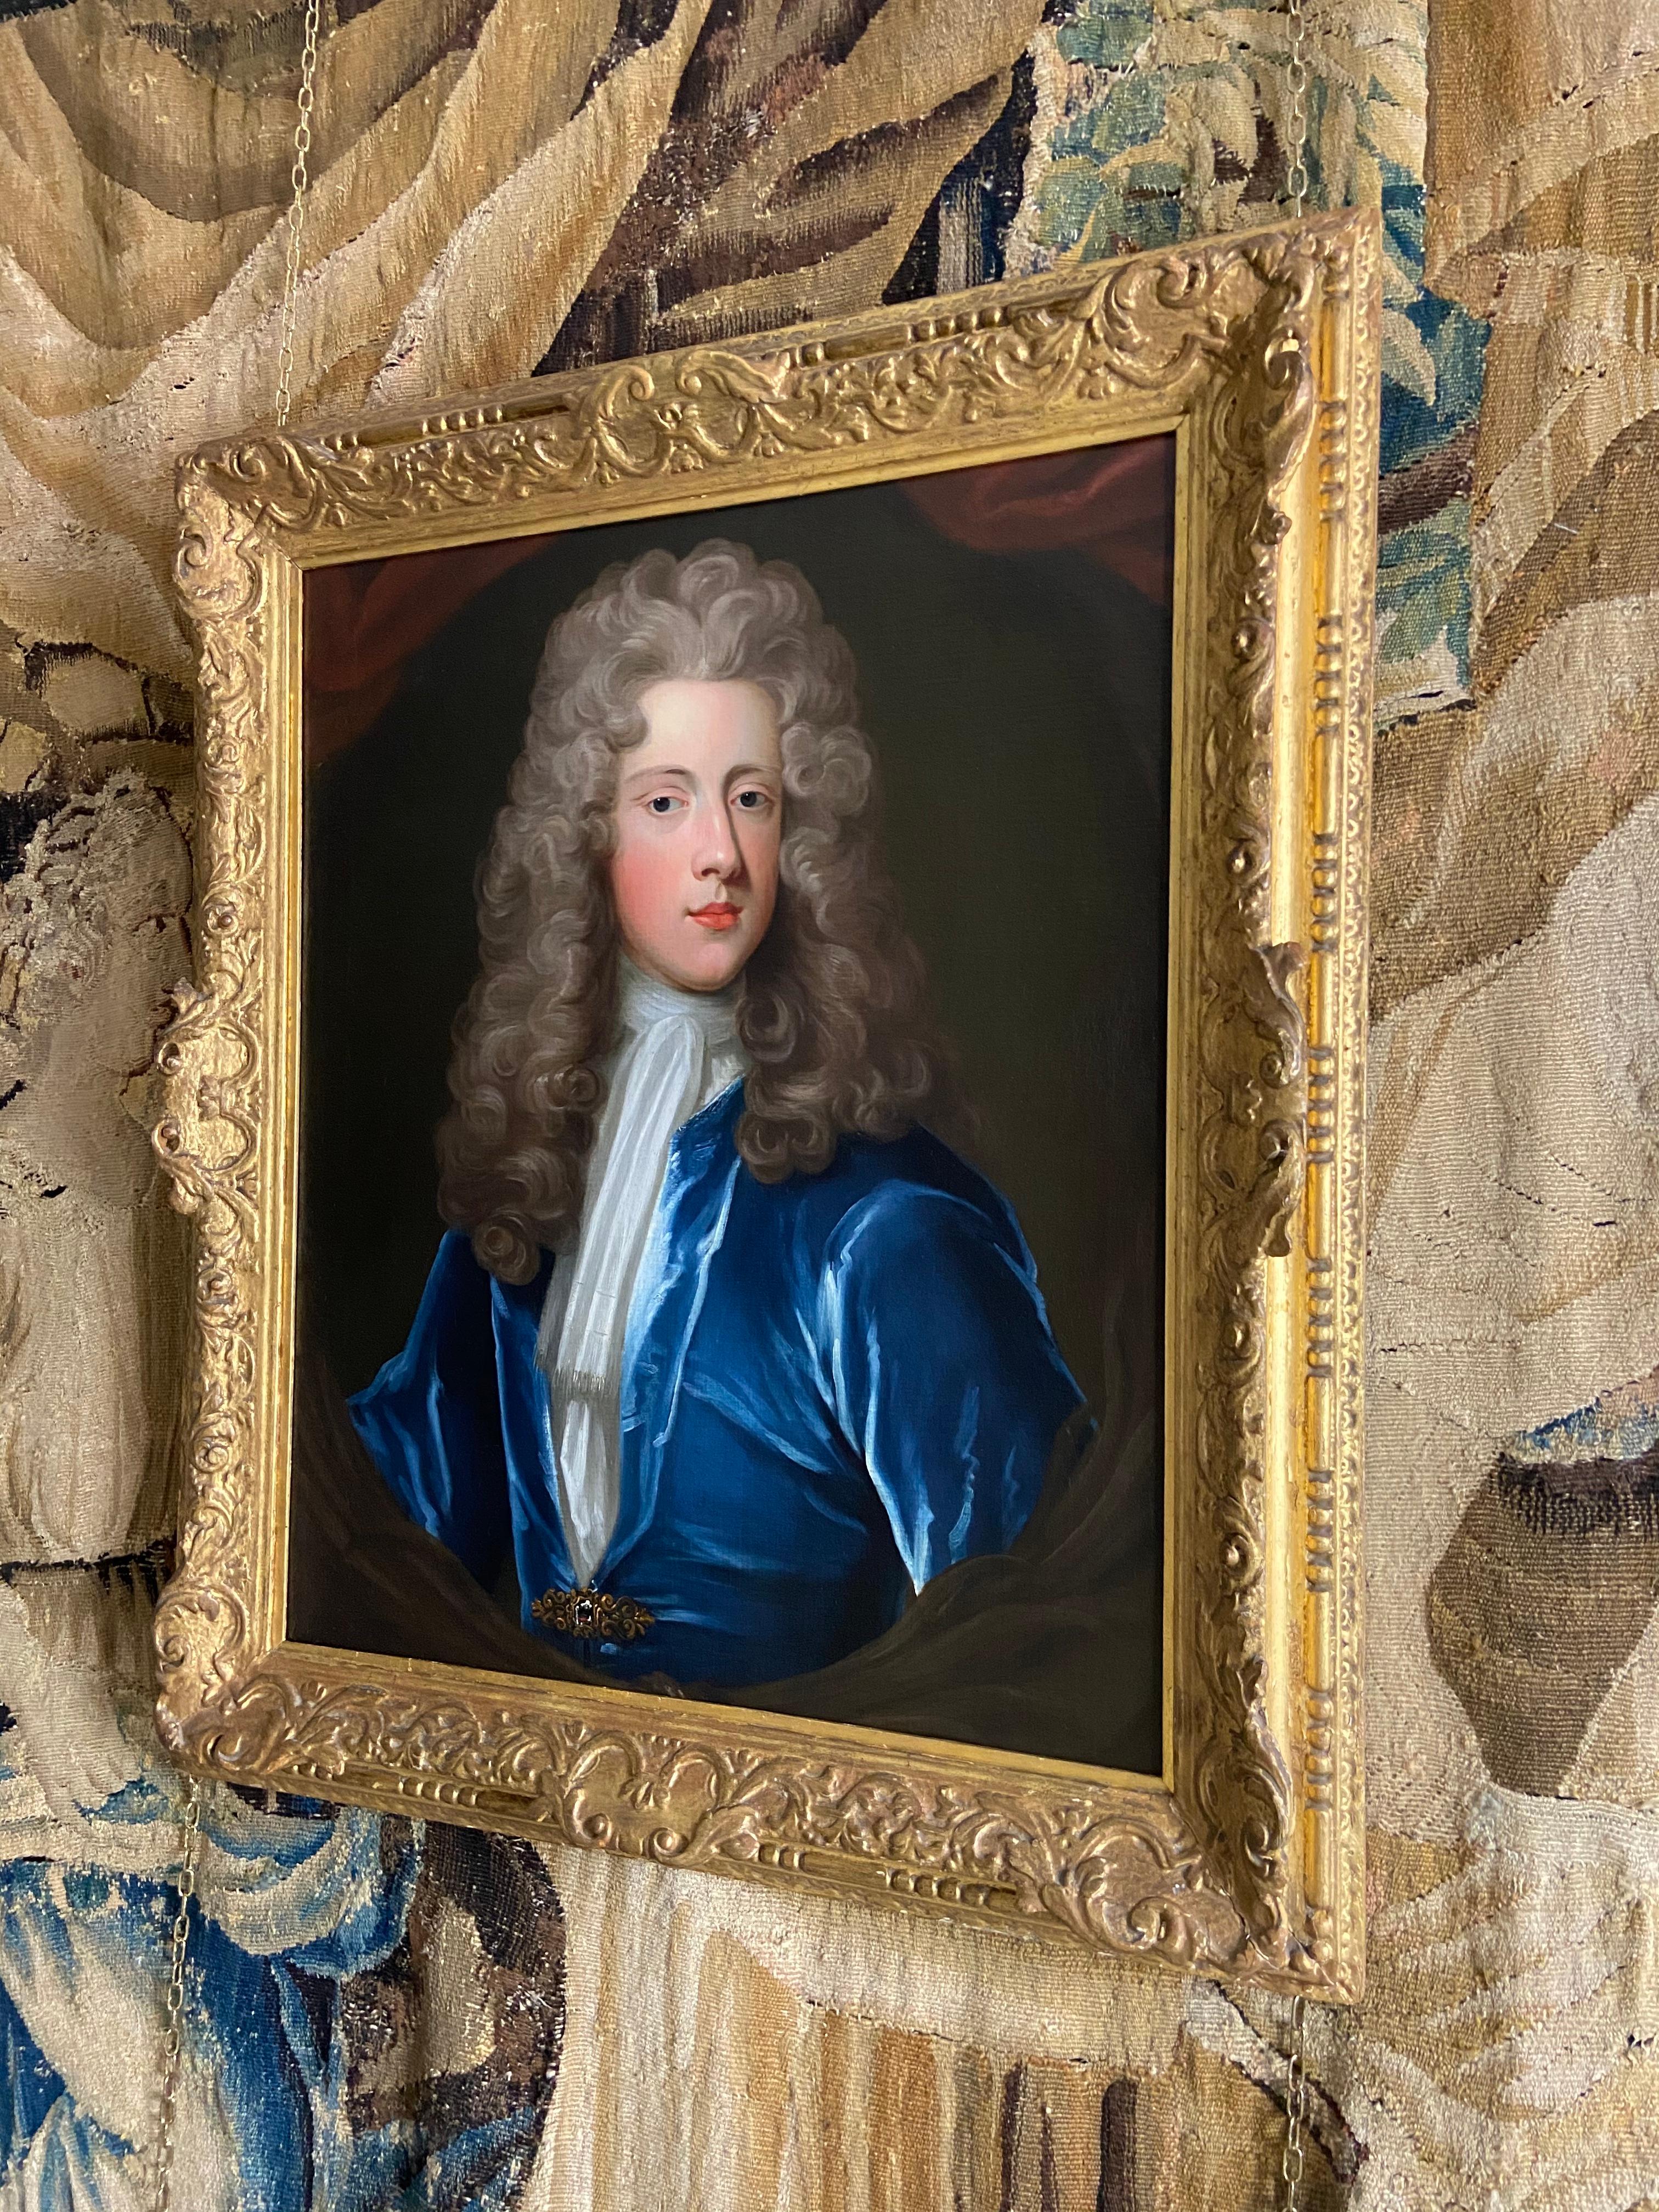 EARLY 18TH CENTURY ENGLISH PORTRAIT OF A YOUNG GENTLEMAN  - ATTRIBUTED TO CHARLES D’AGAR (1669 - 1723)
A a sensitively rendered and highly decorative early 18th portrait of a dashing young gentleman attributed to Charles D’Agar. The sitter is